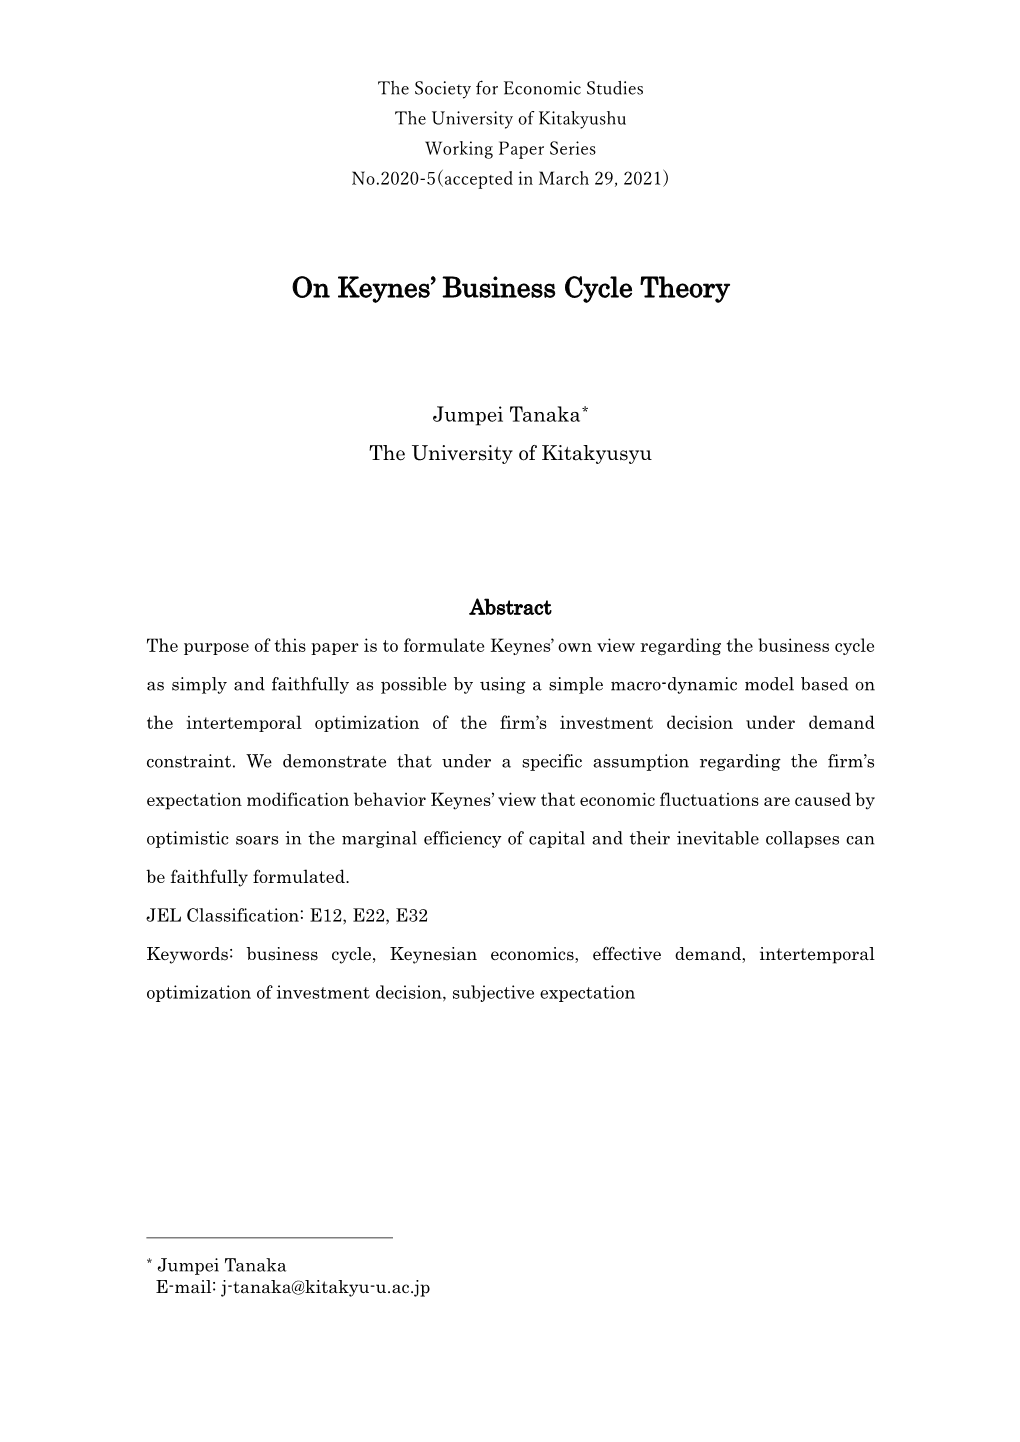 On Keynes' Business Cycle Theory